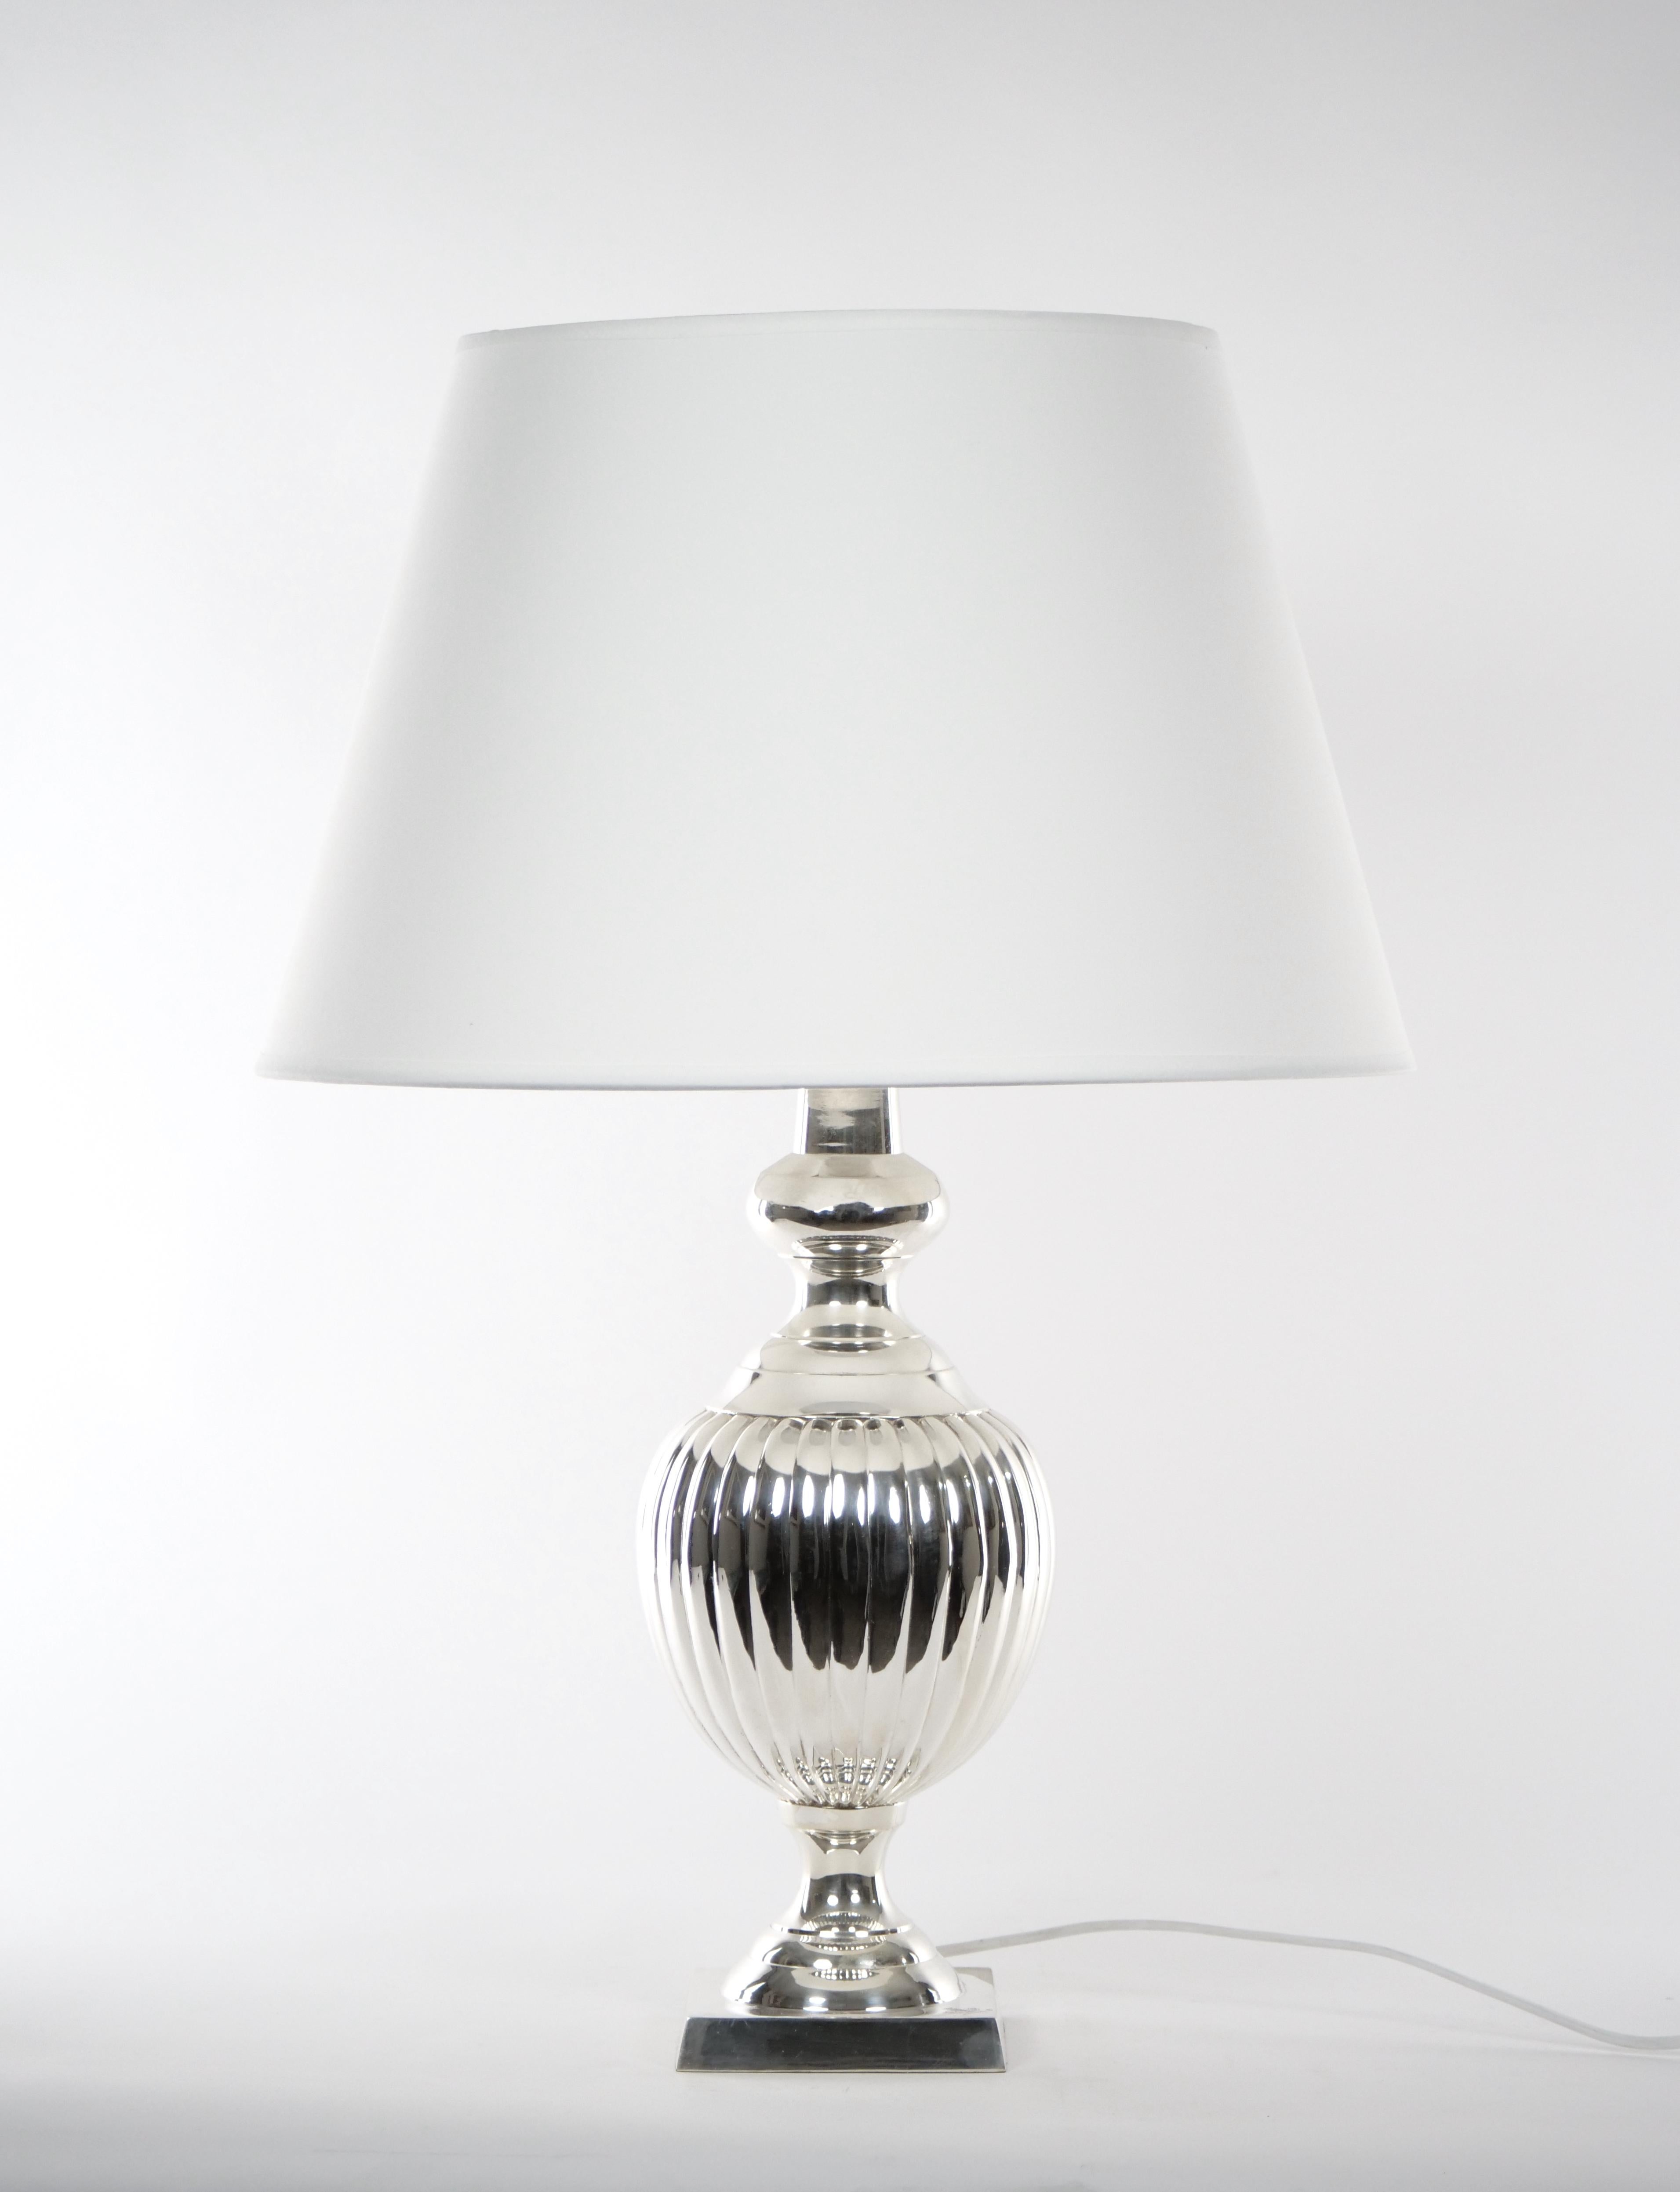 English Pair Mid-20th Century Silver Plate Table Lamp For Sale 10